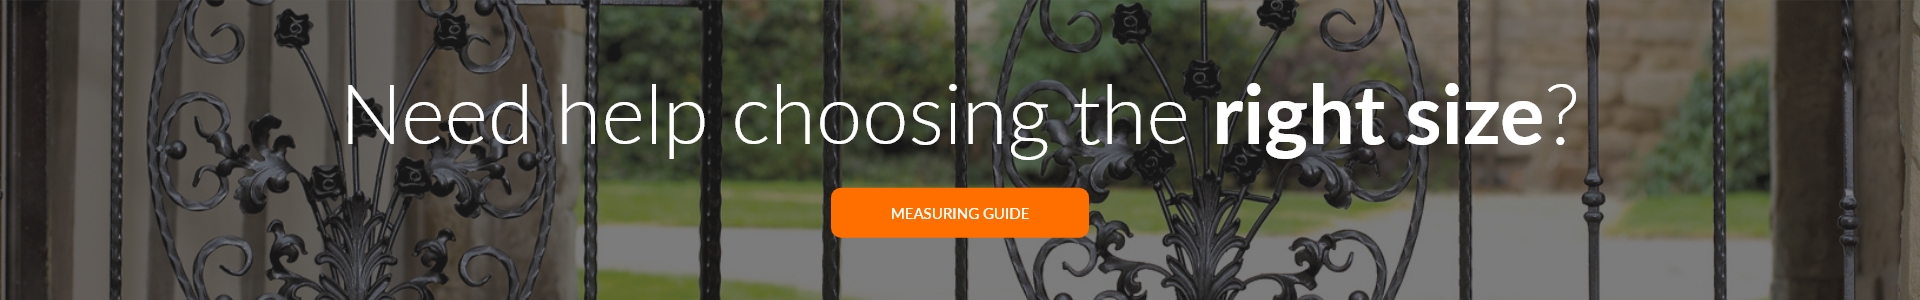 Need help choosing the right size? Click here to view the measuring guide